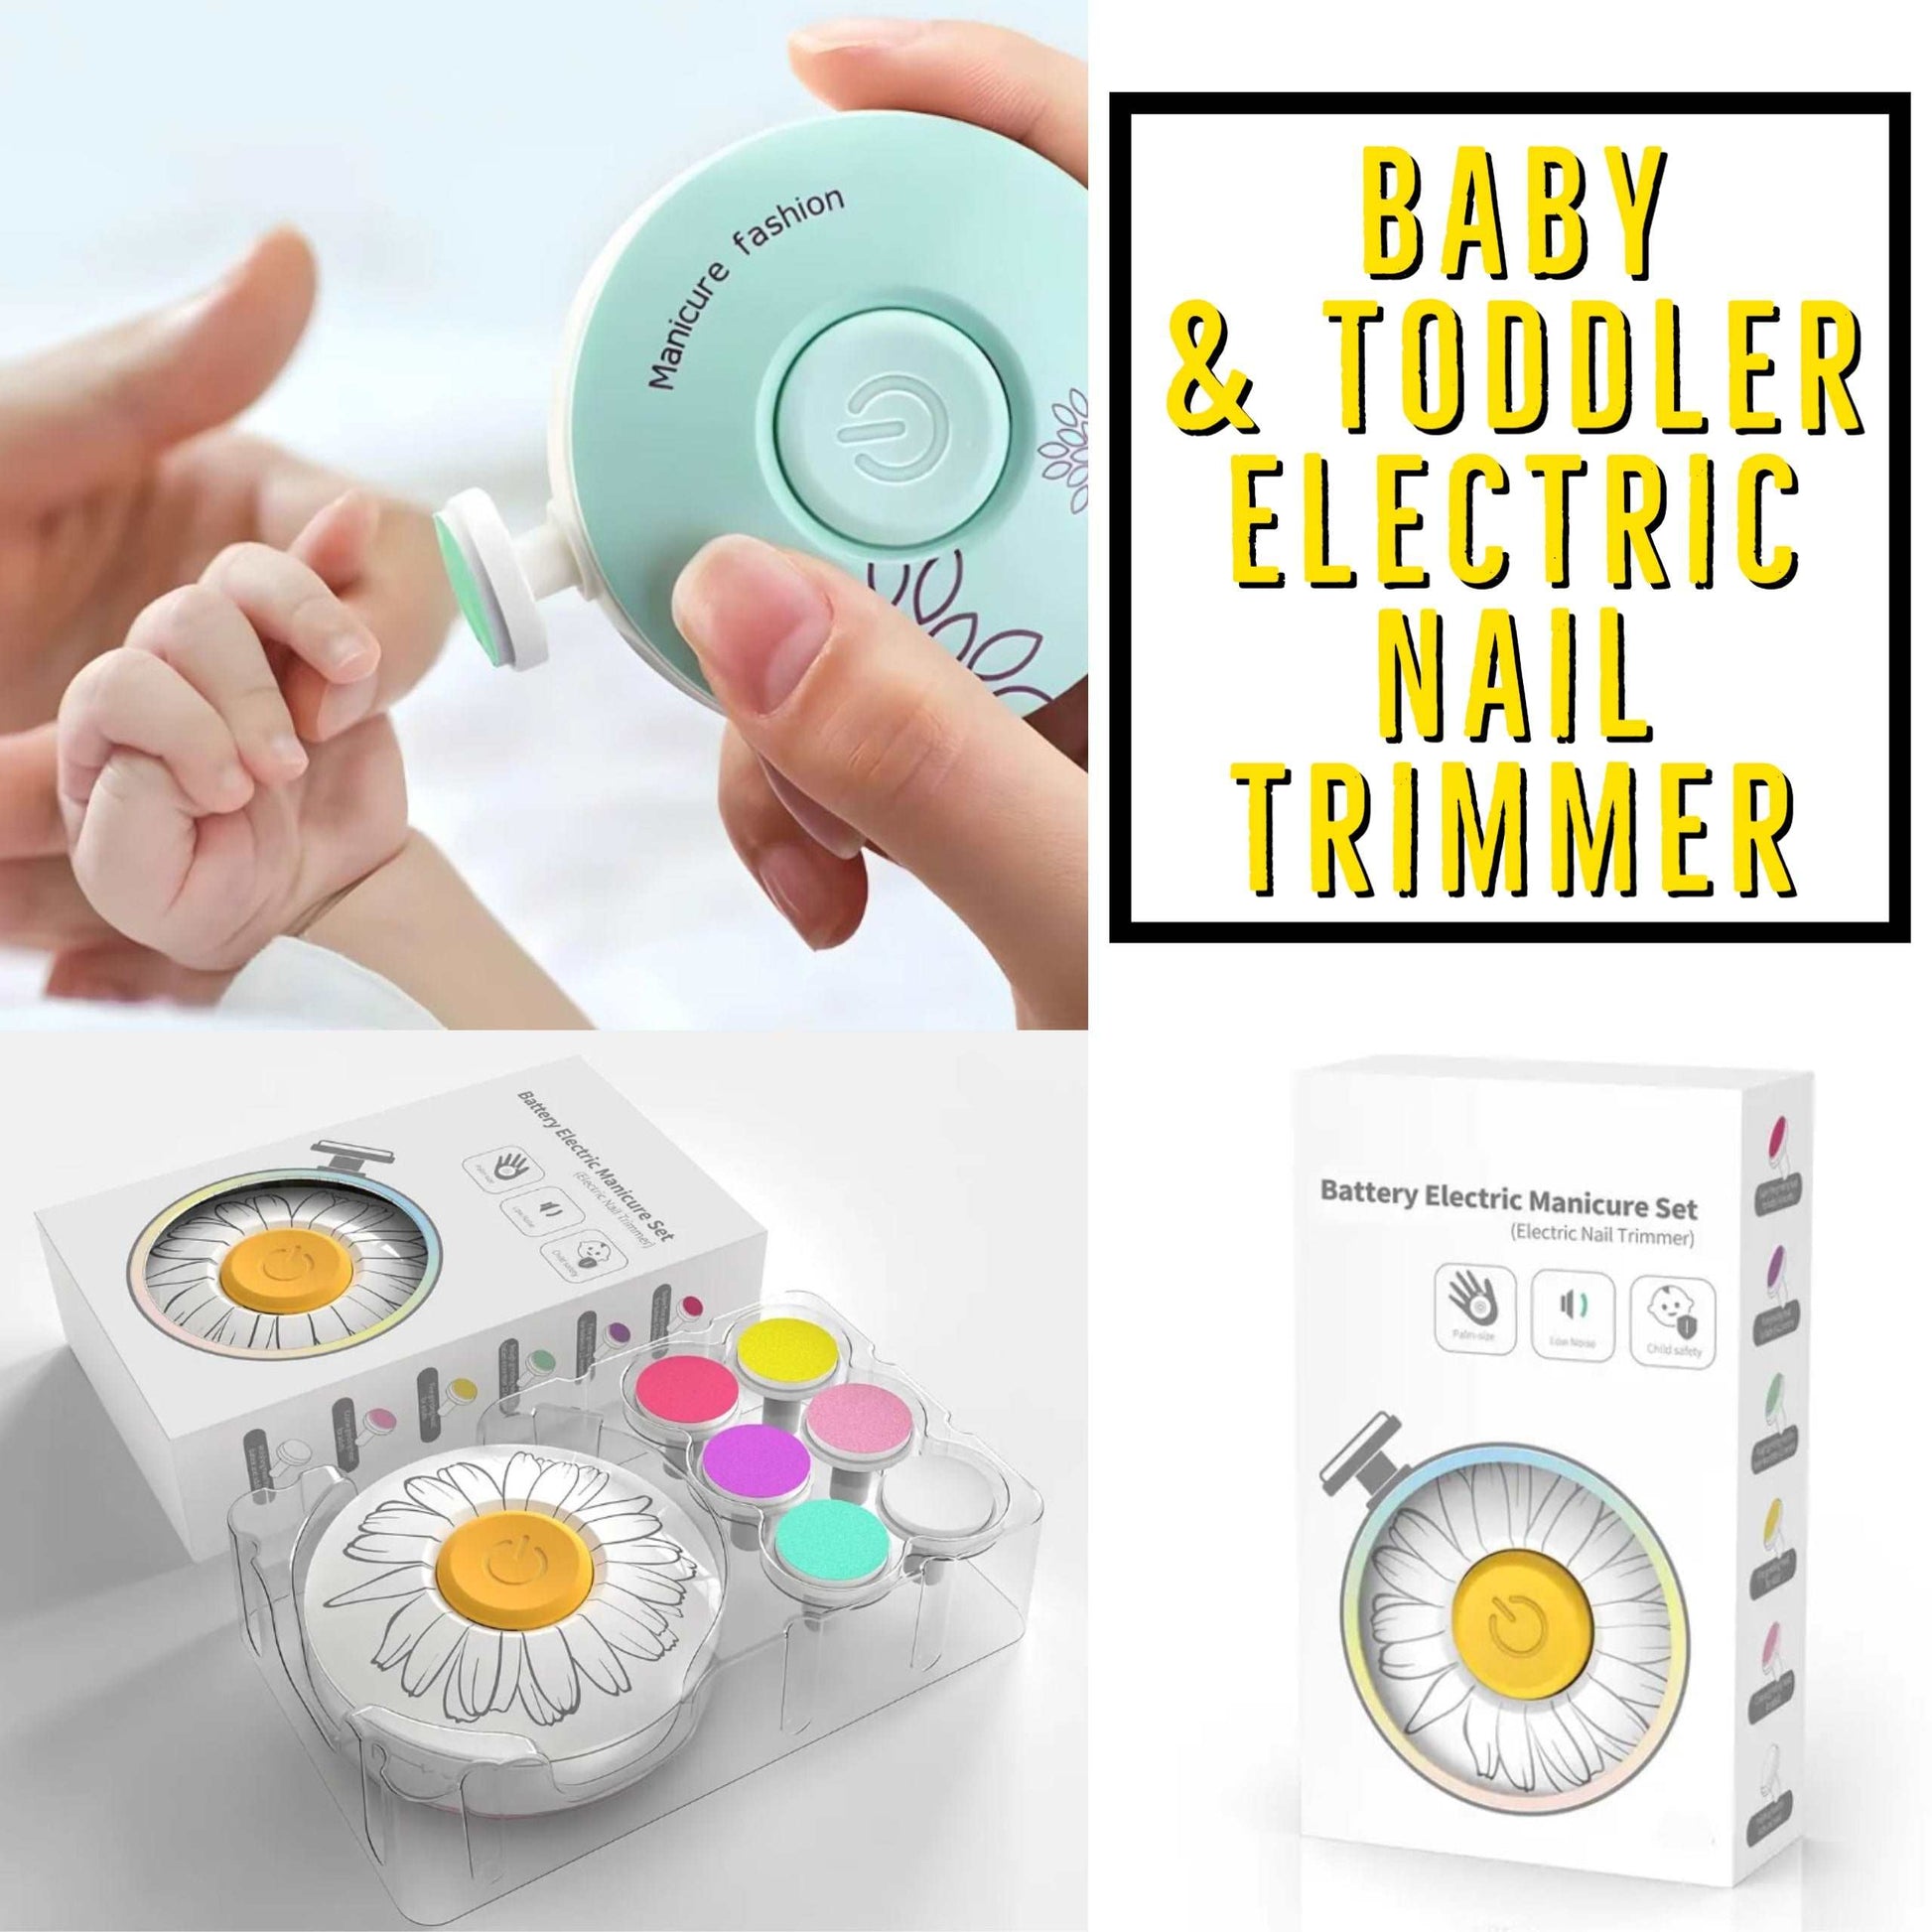 Baby & Toddler Nail Trimmer - Daisy Baby & Toddler Nail Trimmer